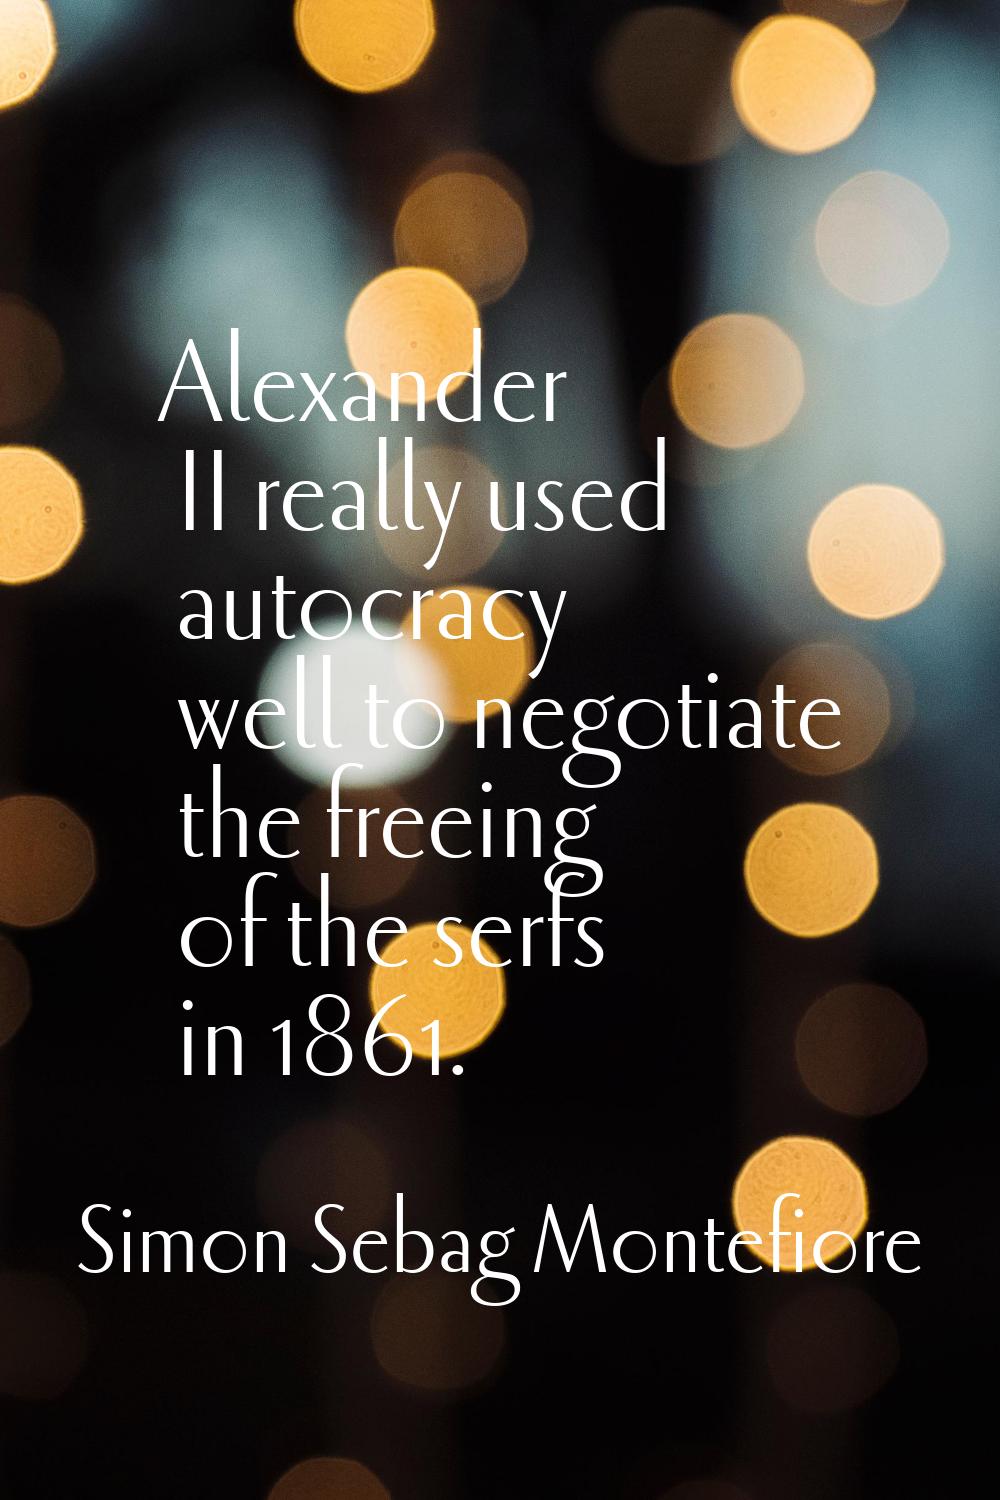 Alexander II really used autocracy well to negotiate the freeing of the serfs in 1861.